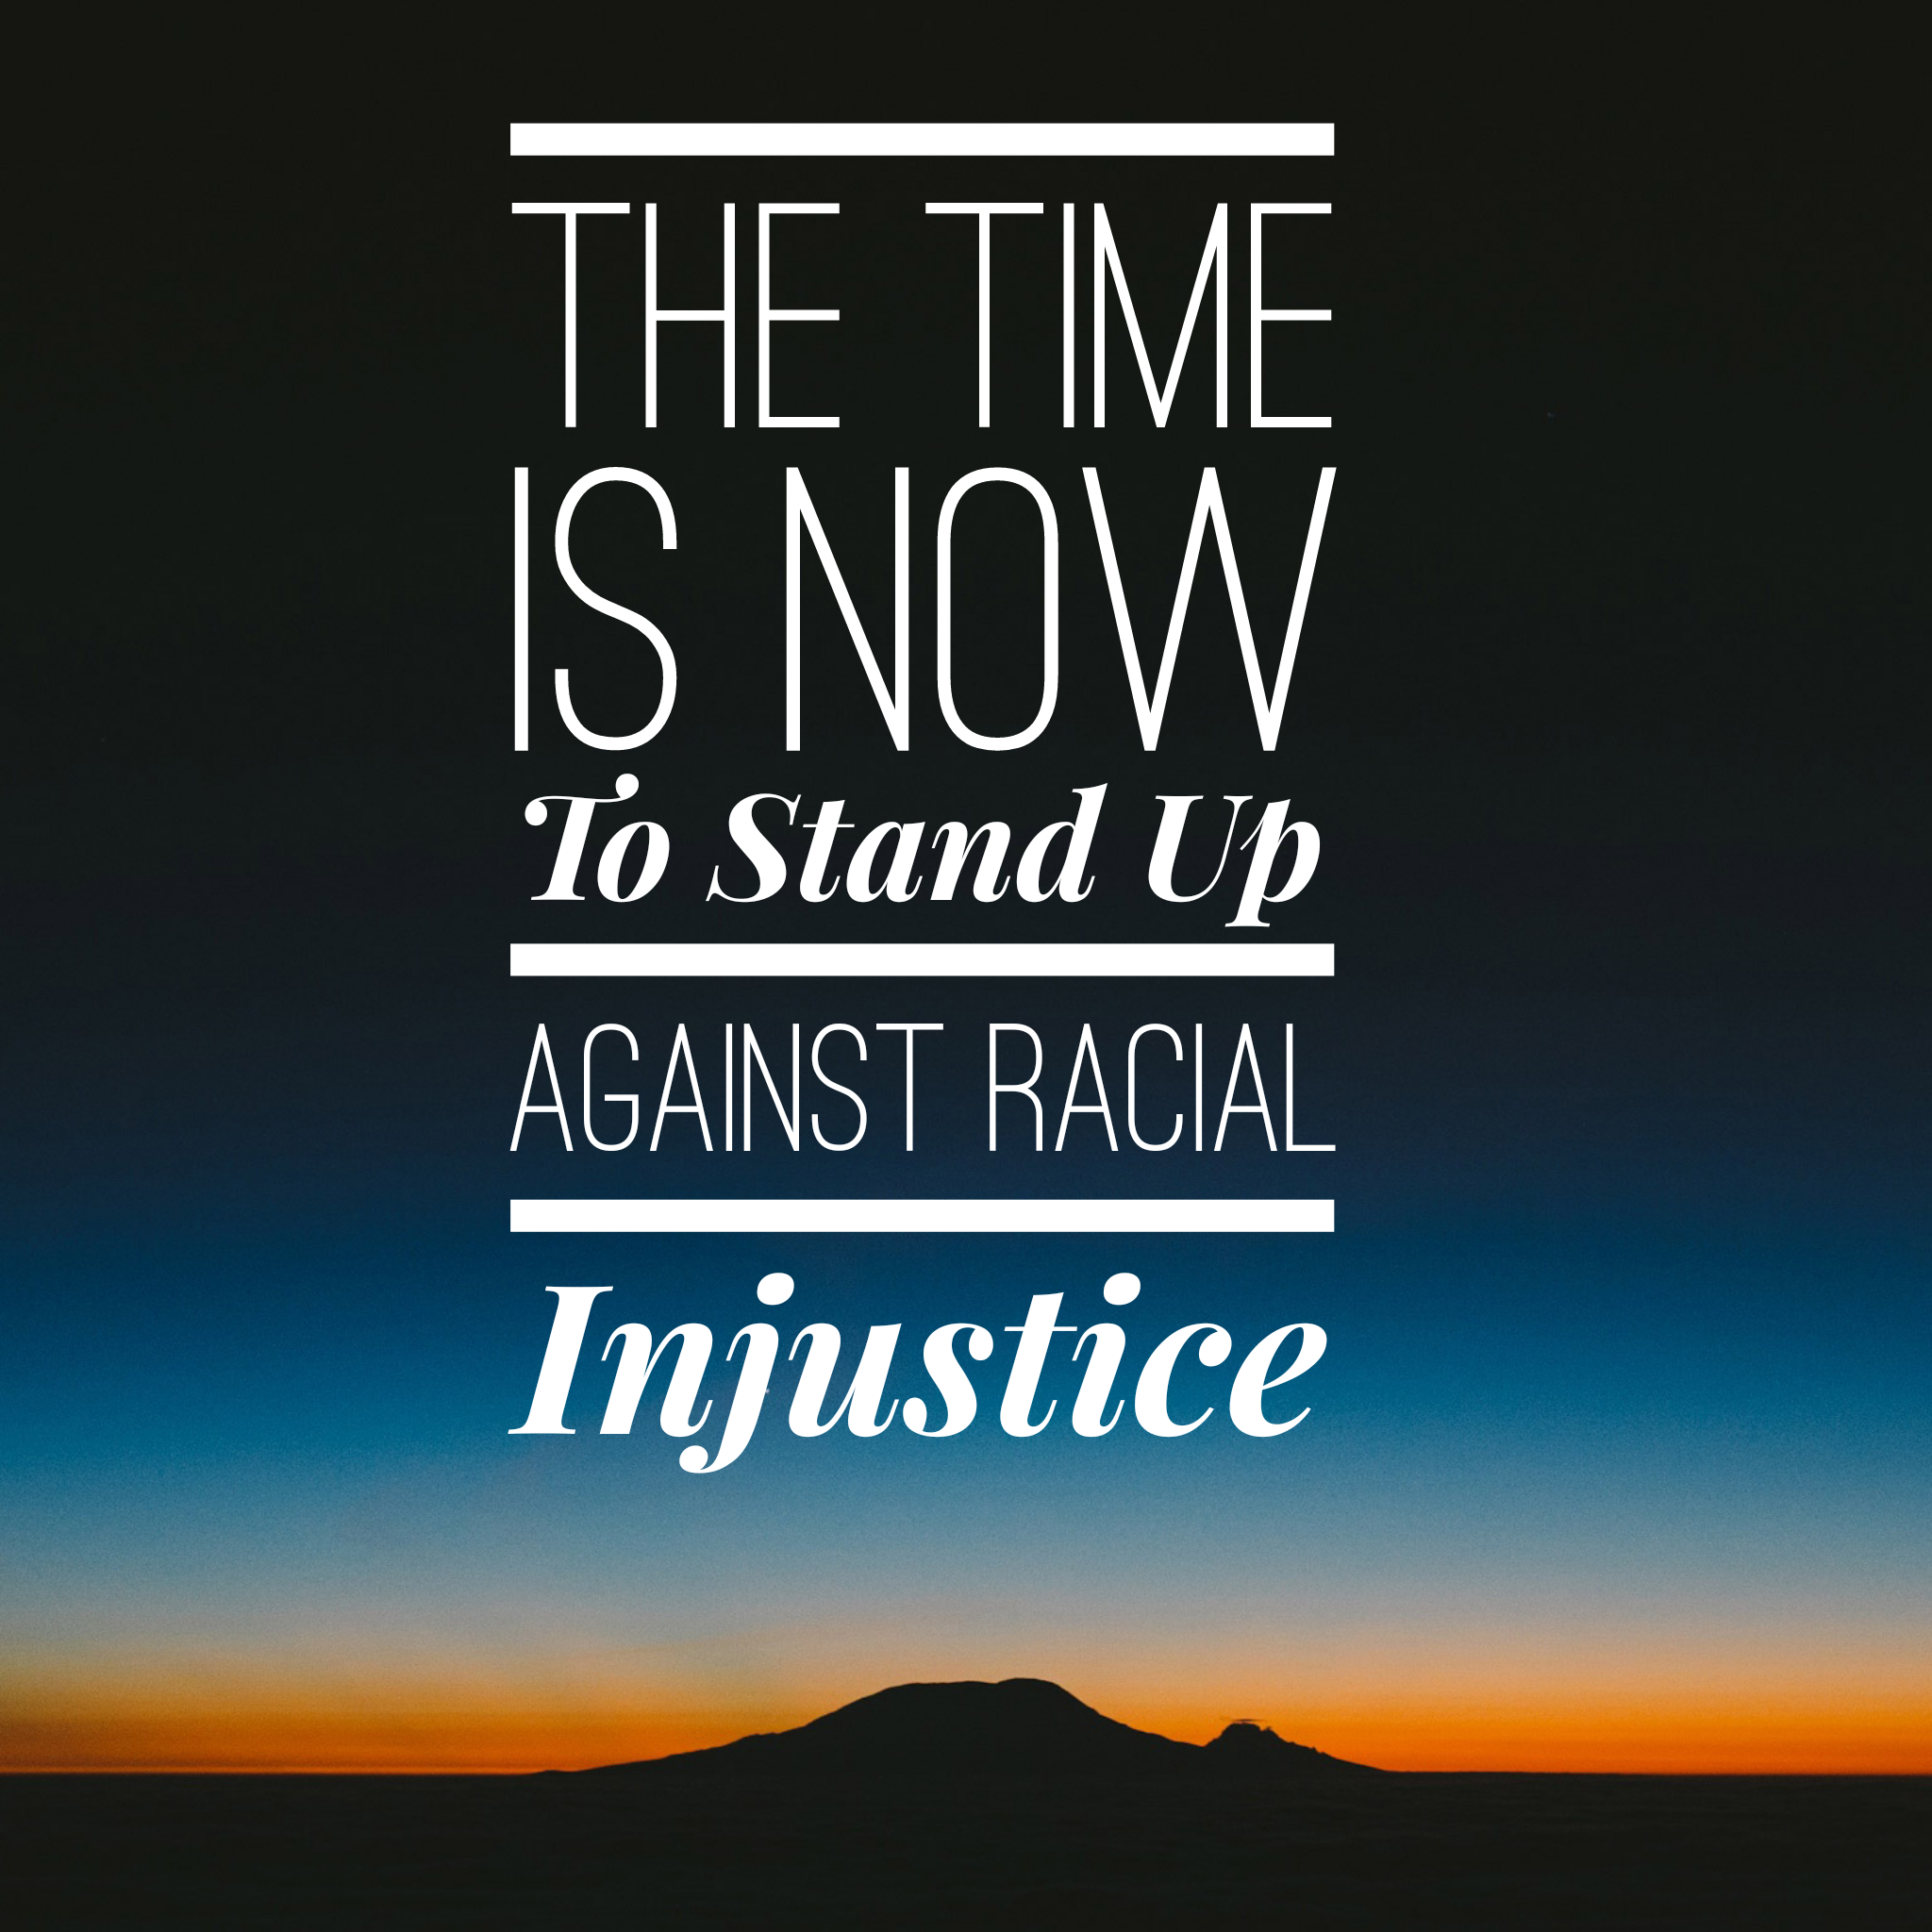 The Time is Now to Stand Up Against Racial Injustice. Details on The Pillow Goddess Blog